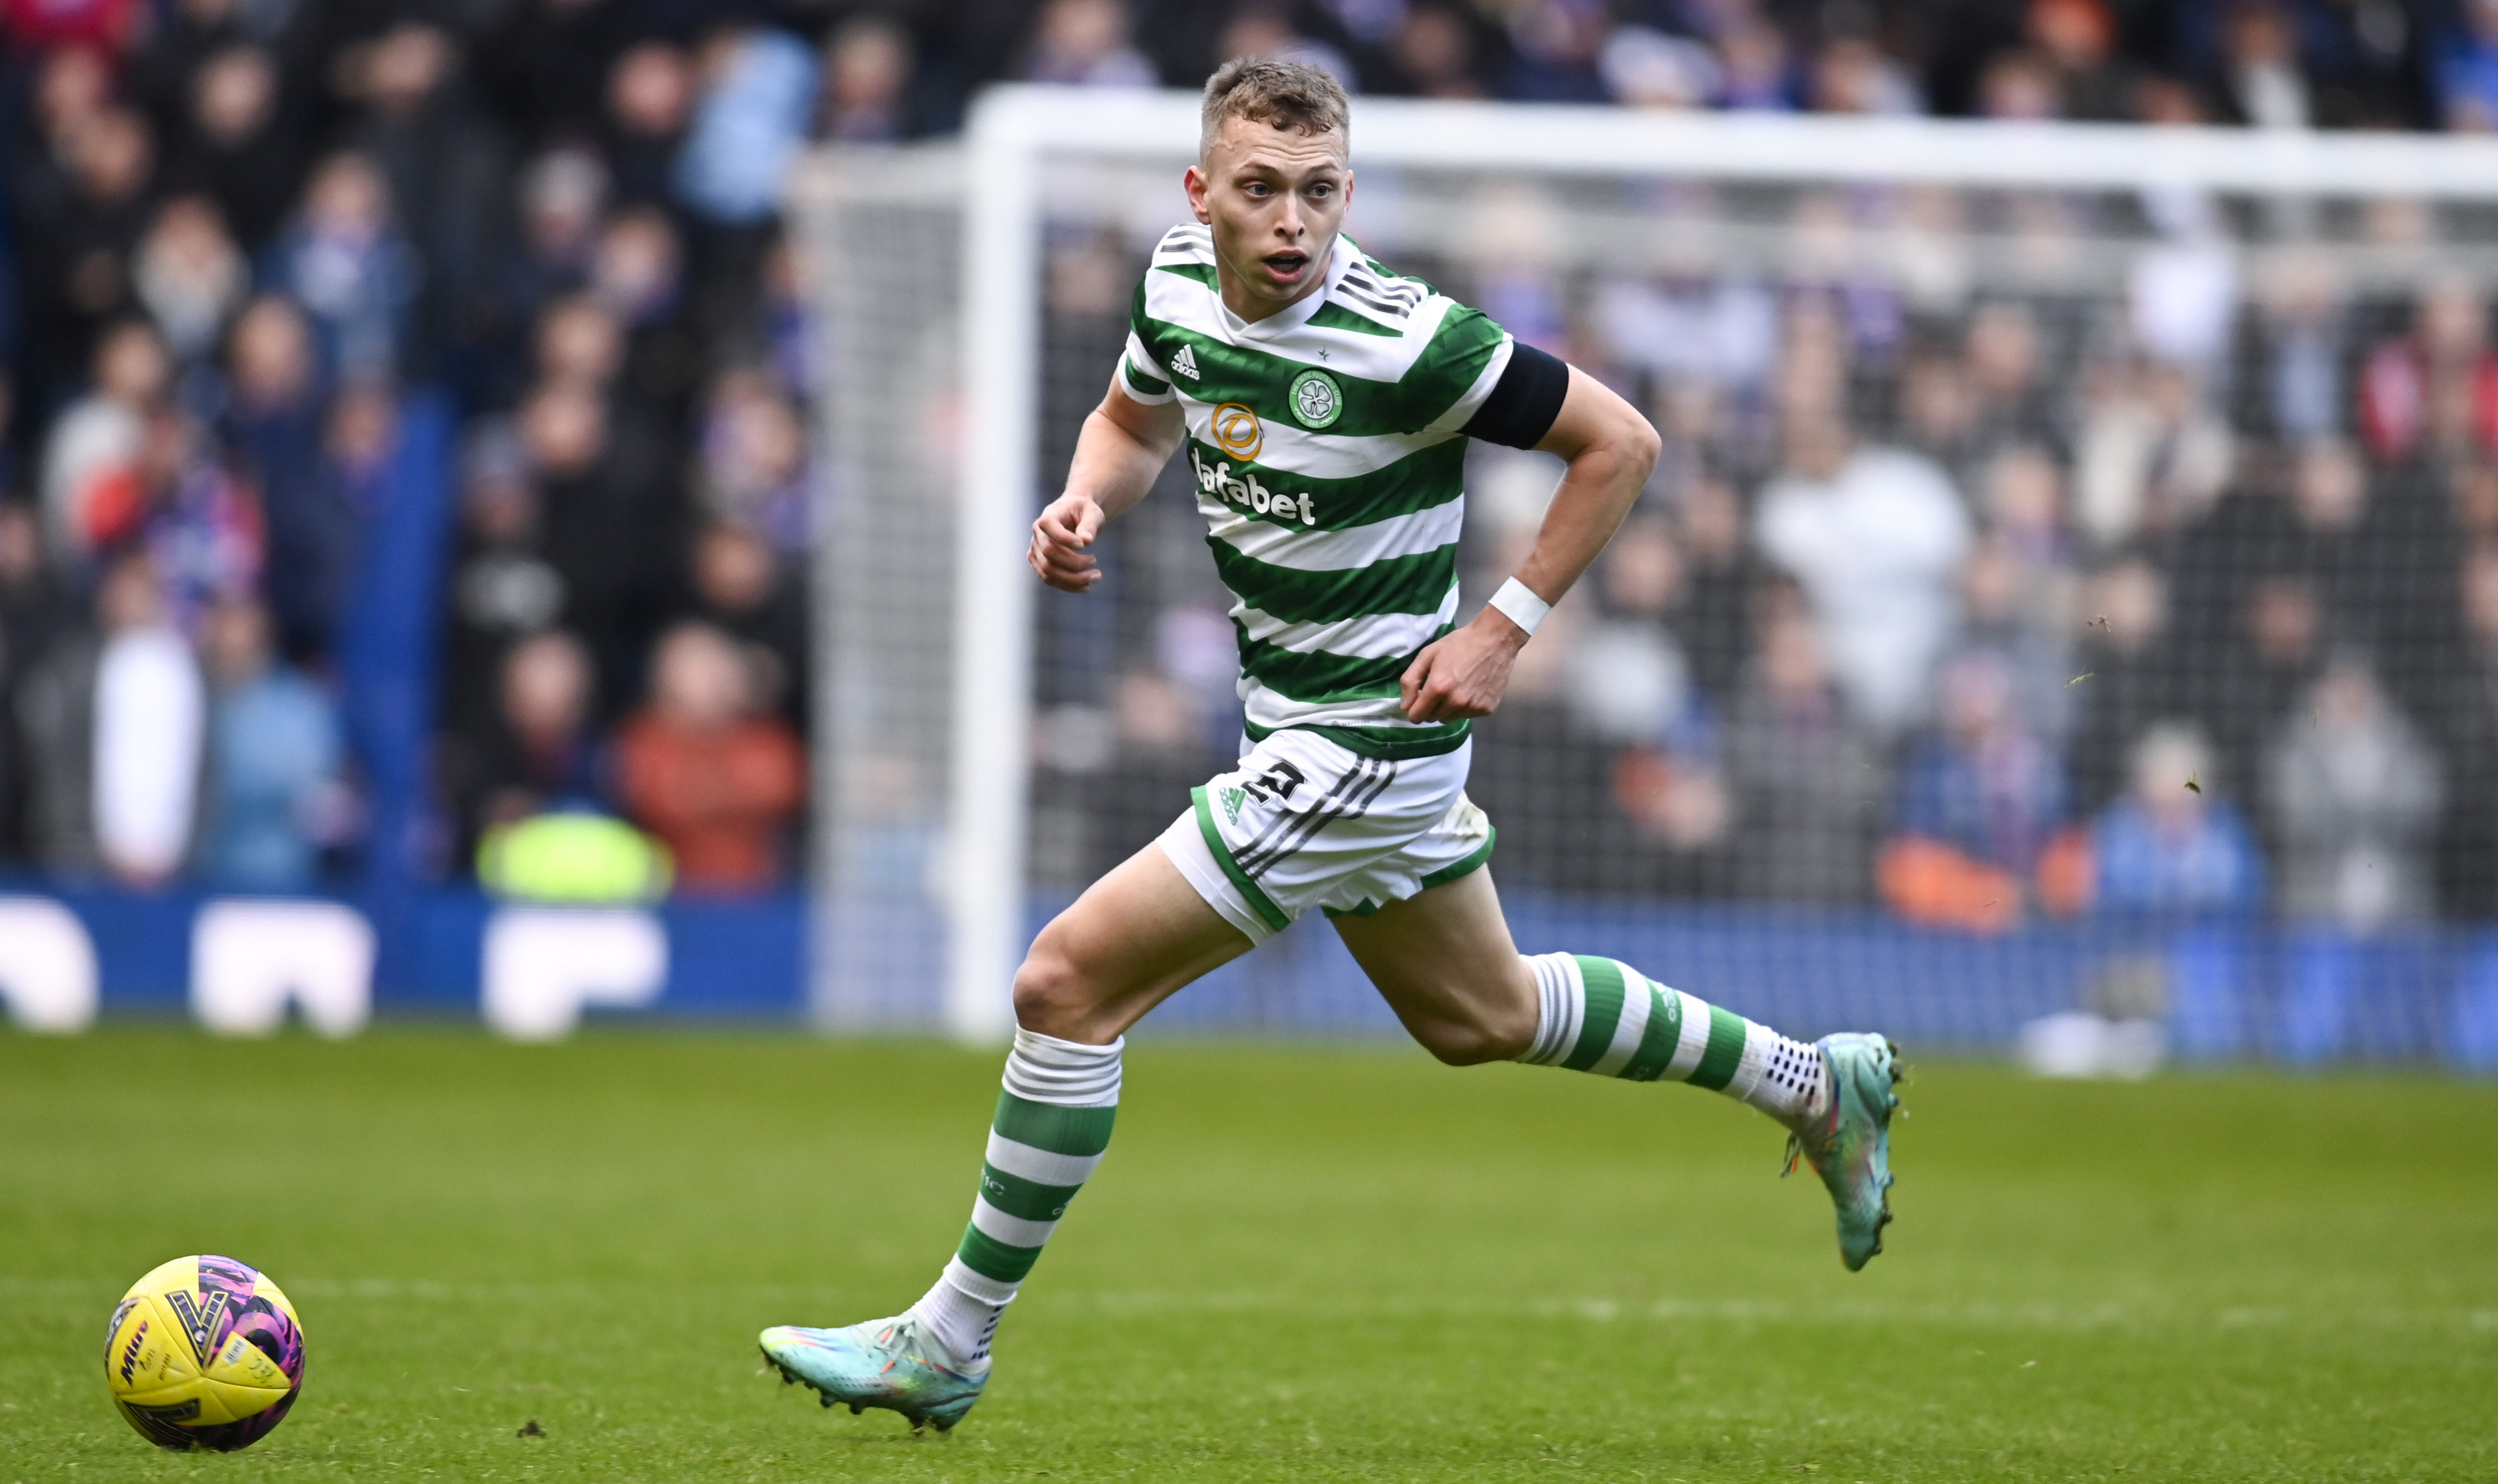 Johnston made his Celtic debut in the 2-2 draw.